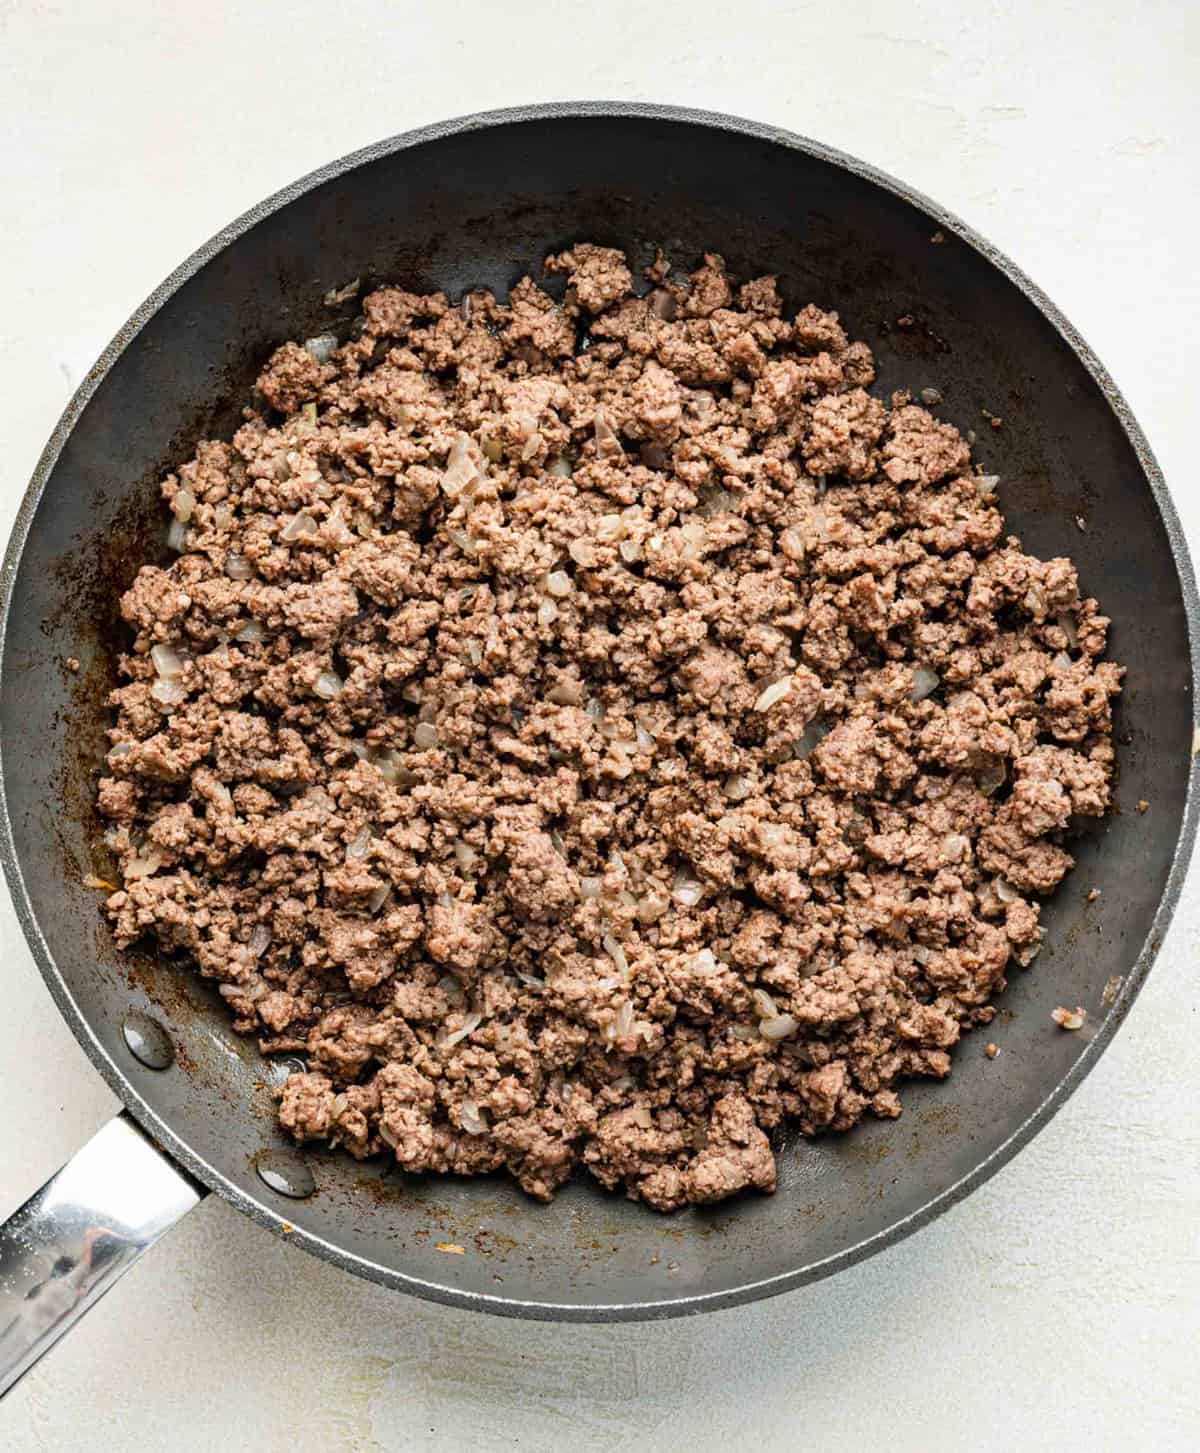 Browning ground beef with onions in a skillet.